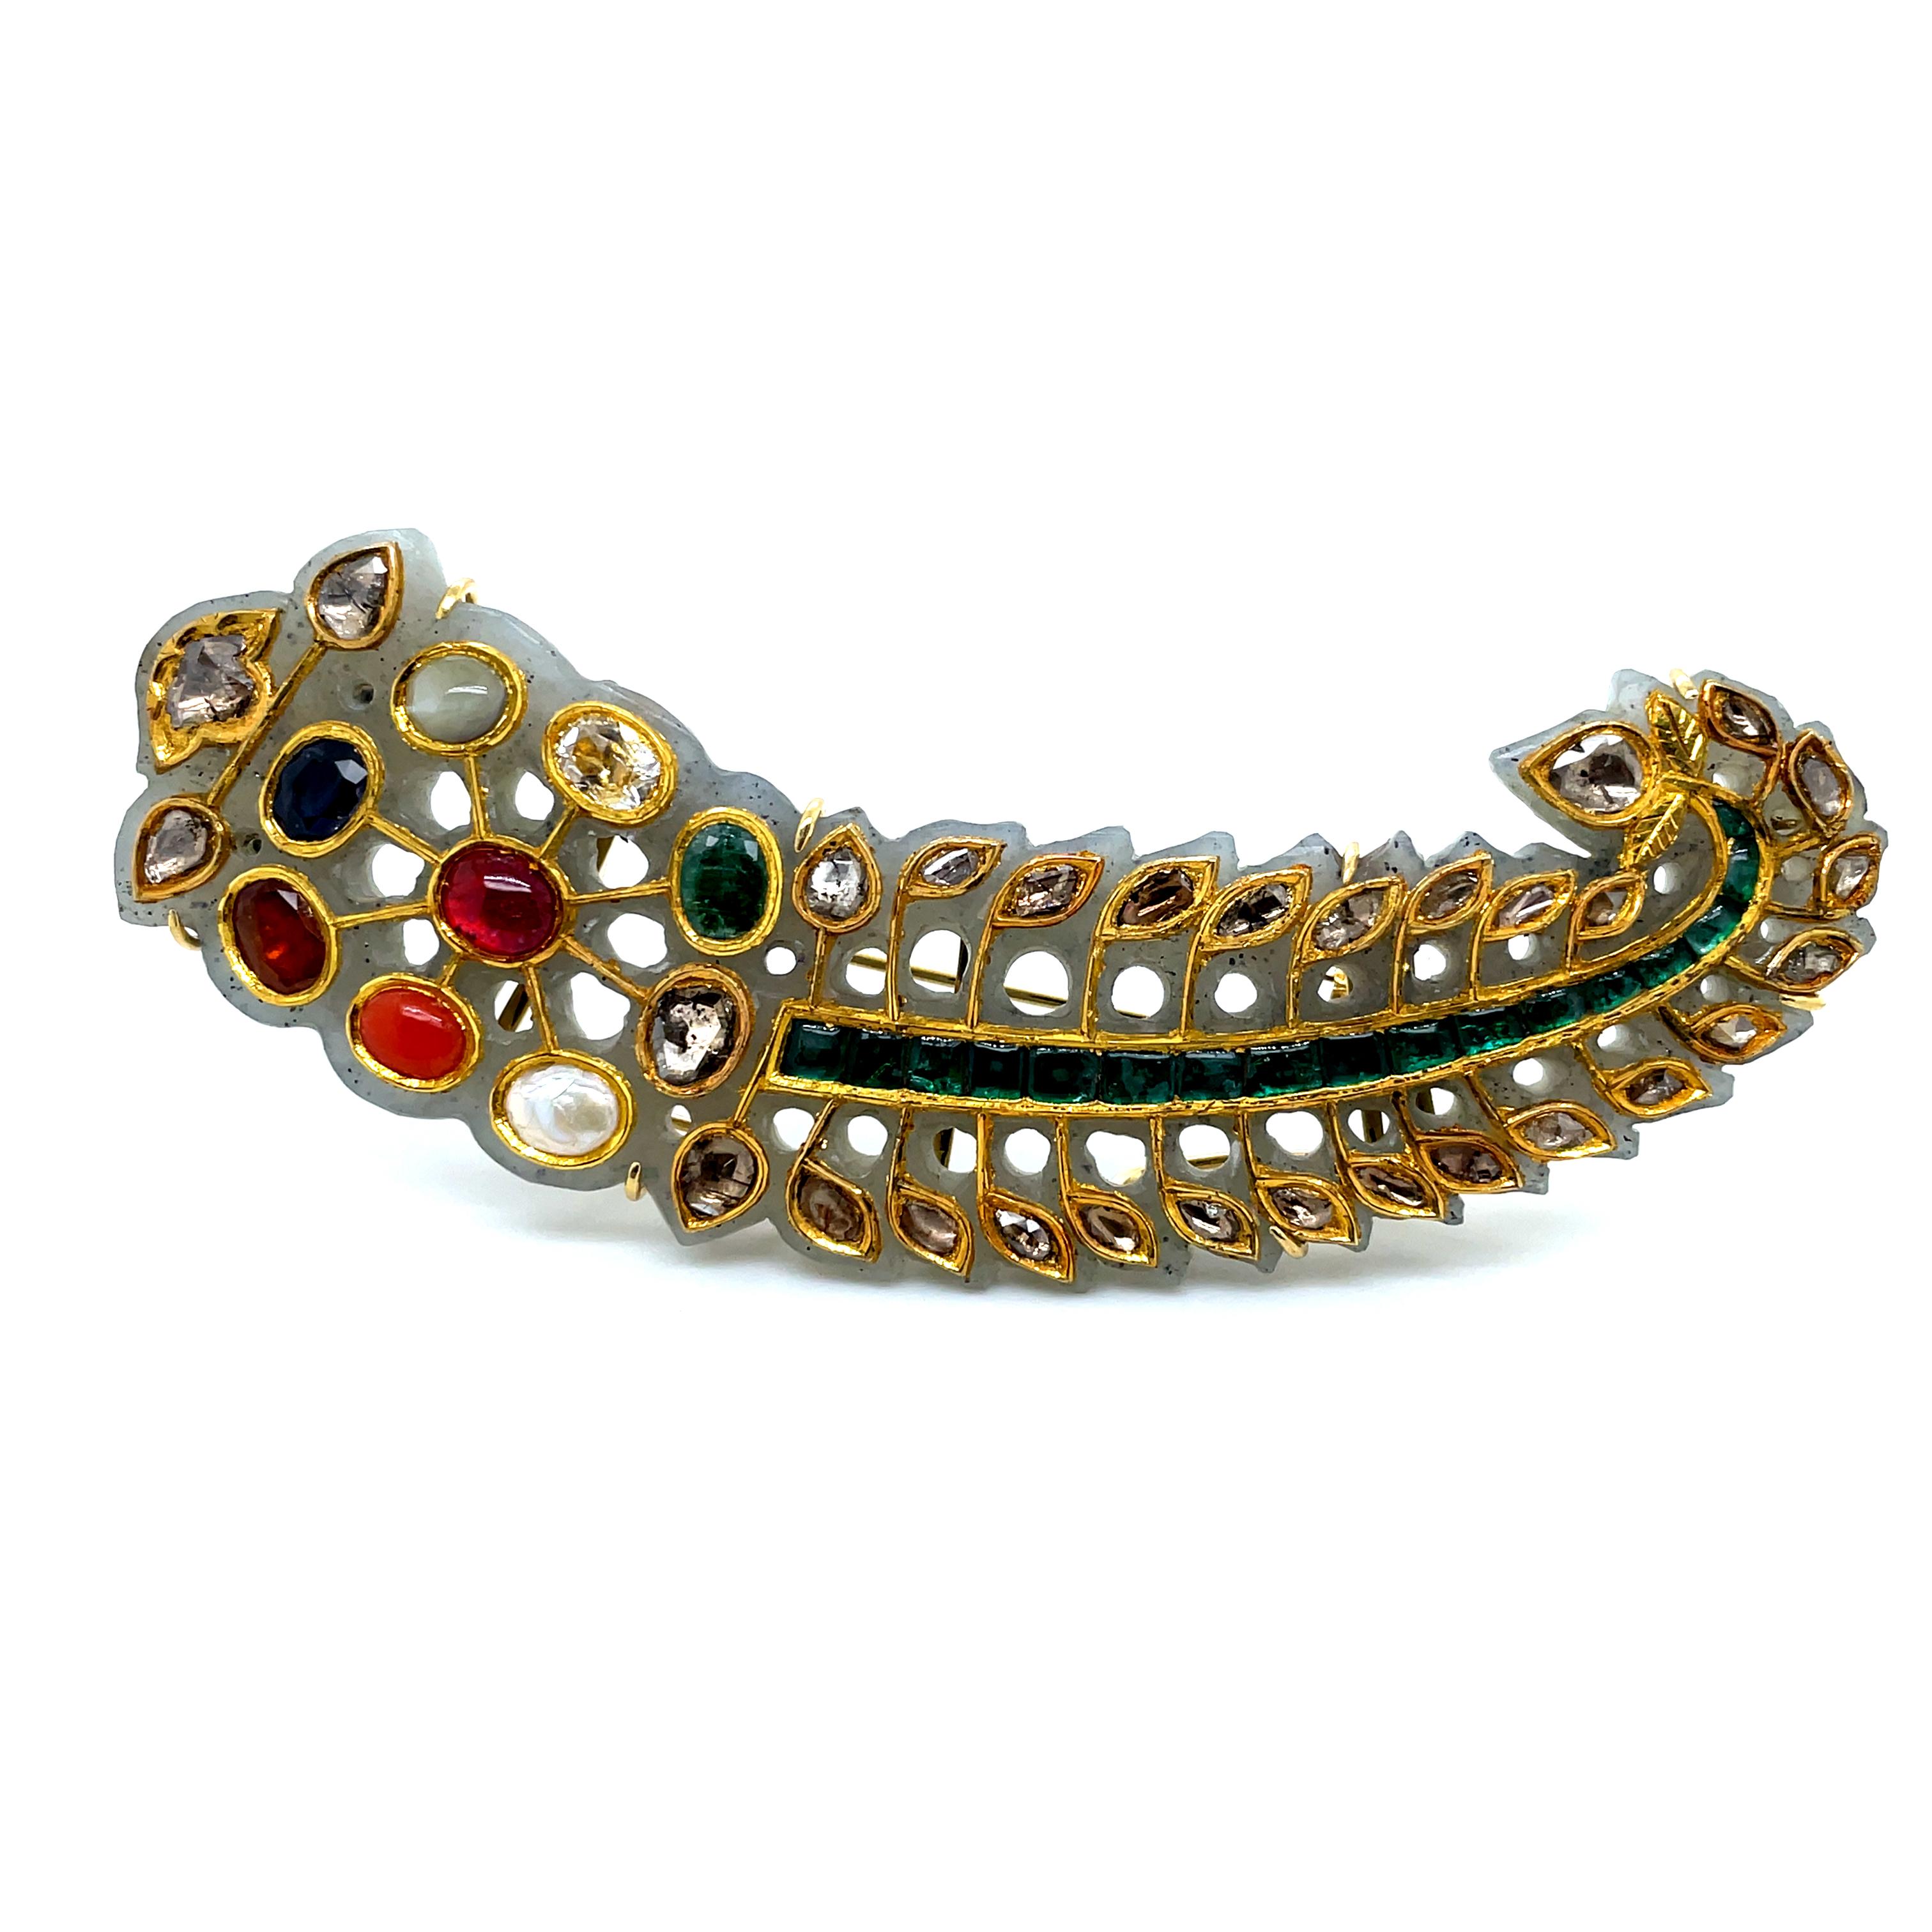 1960s Antique Turban Ornament (Sarpech) Brooch With Navratna (9) Stones on Nephrite With
Diamonds

This antique Turban Ornament, from the 1960s also known as a Kilangi or Sarpech is a captivating blend of craftsmanship and artistic